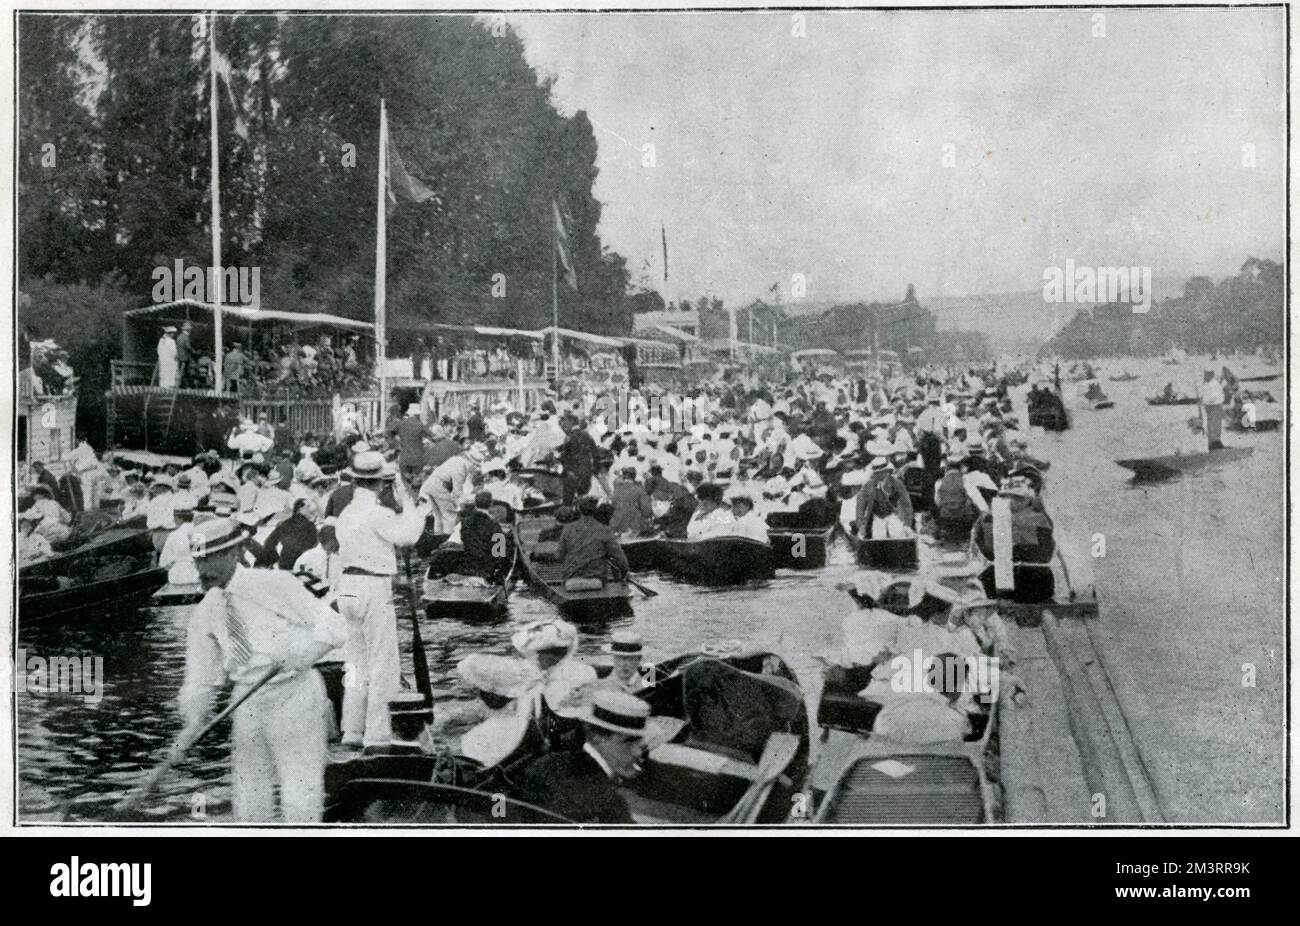 Crowd of people gathered to watch the annual event on the River Thames.     Date: 1905 Stock Photo